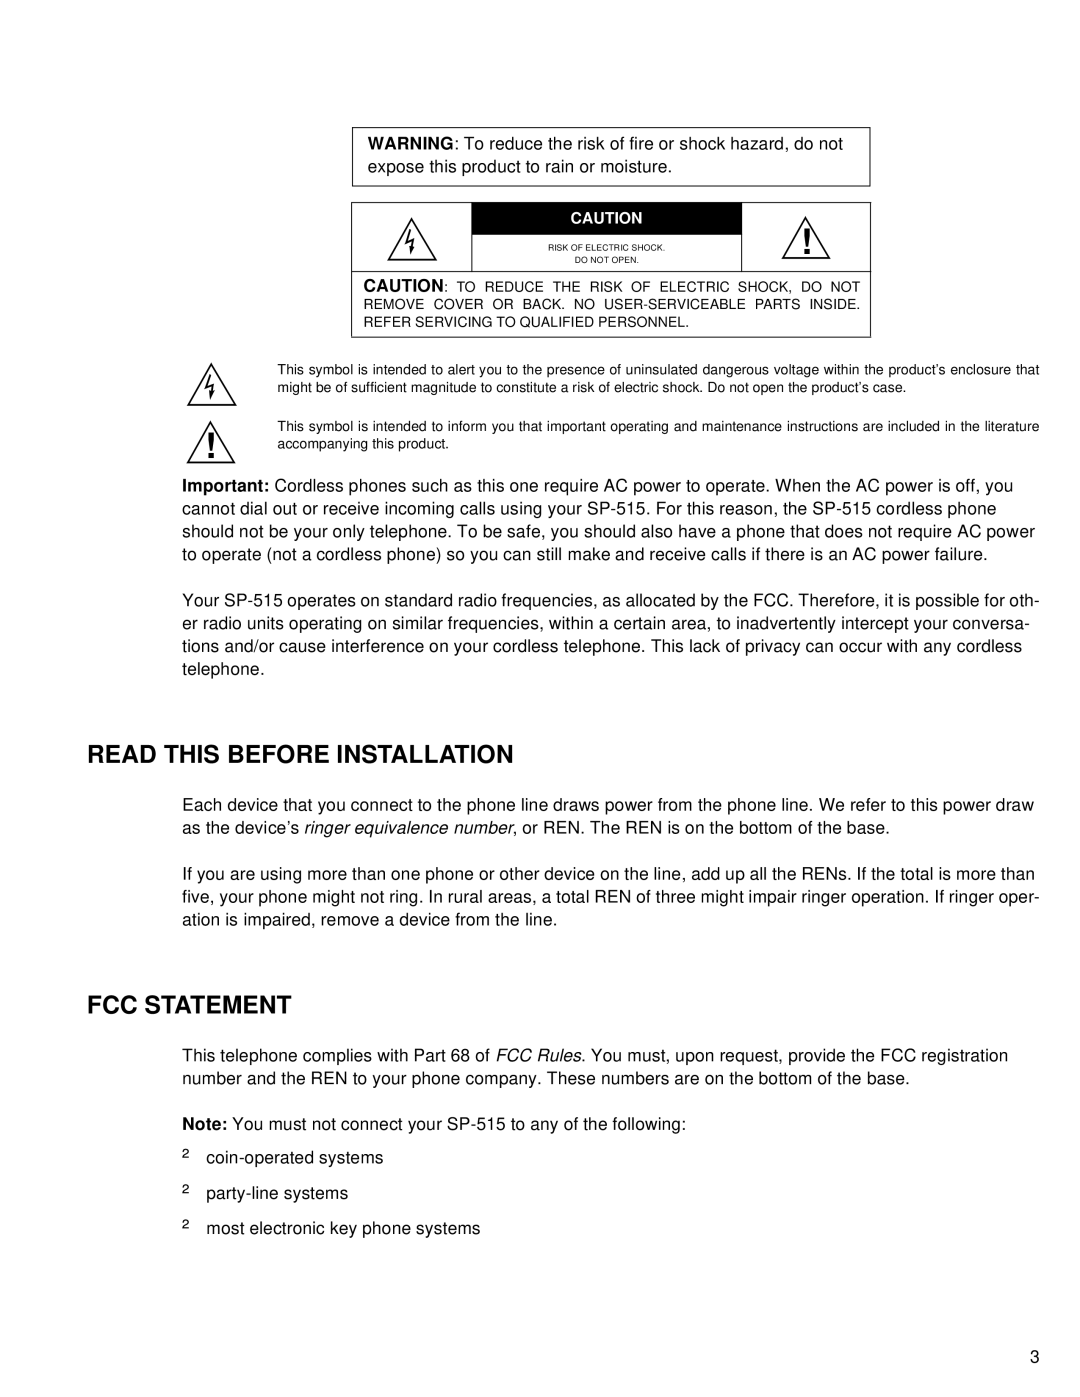 Sprint Nextel SP-515 owner manual Read This Before Installation, Fcc Statement 